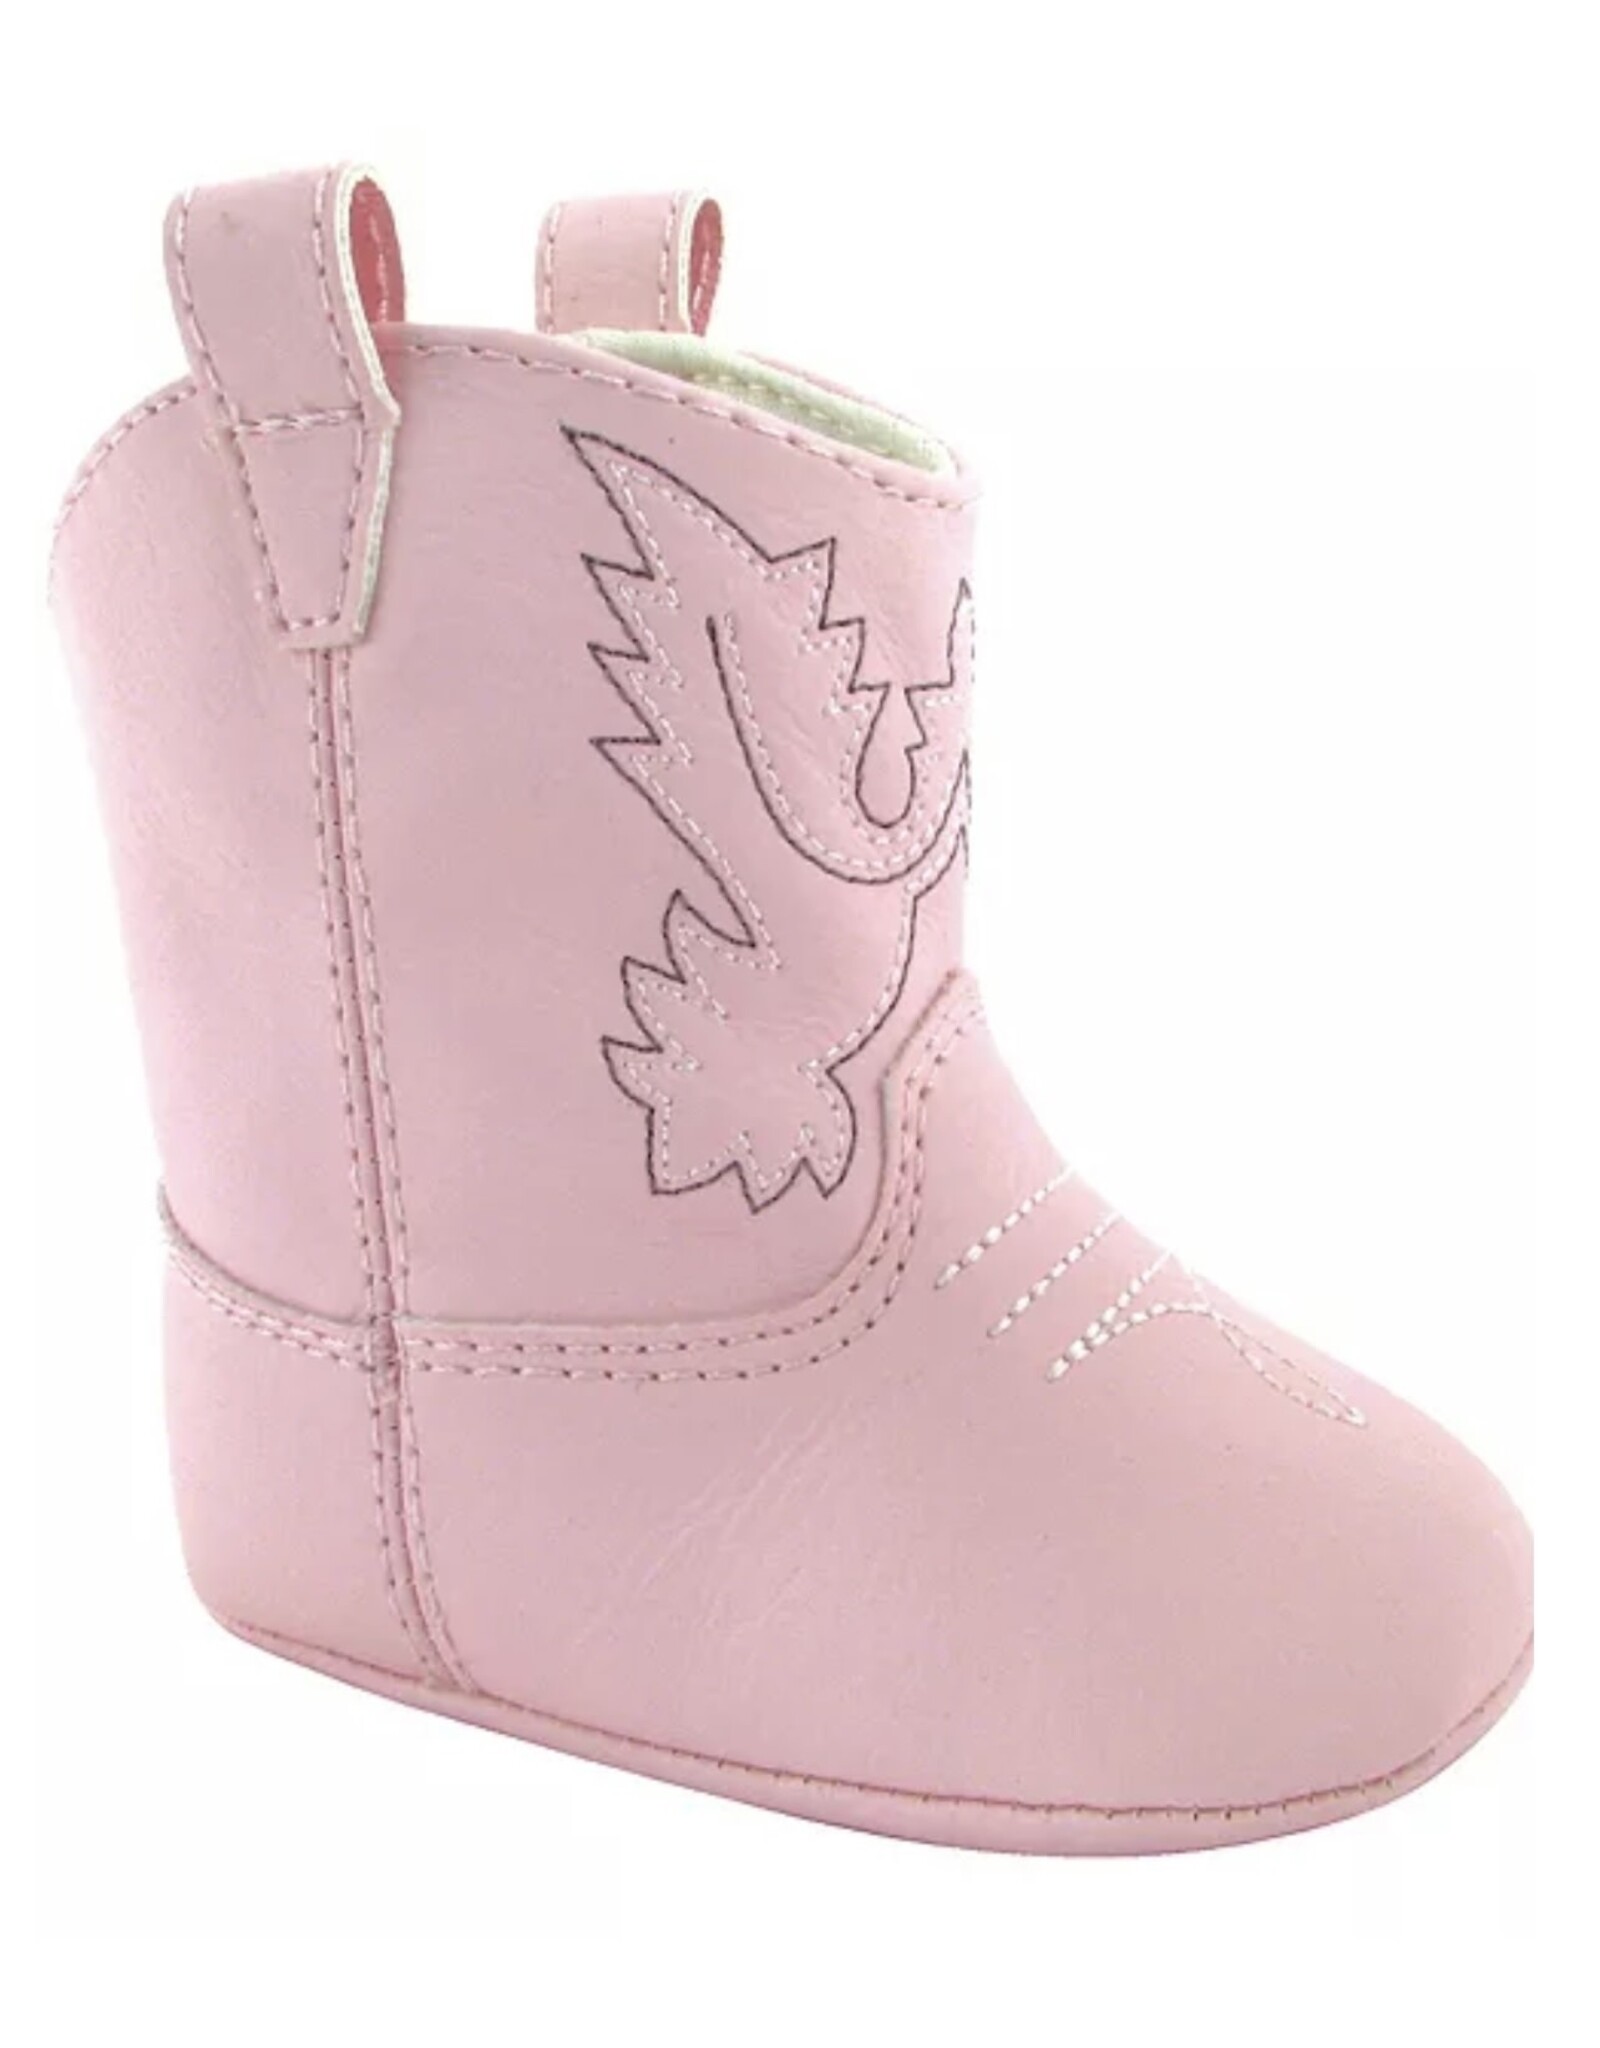 Baby Deer- Pink Western Boot w/Embroidery